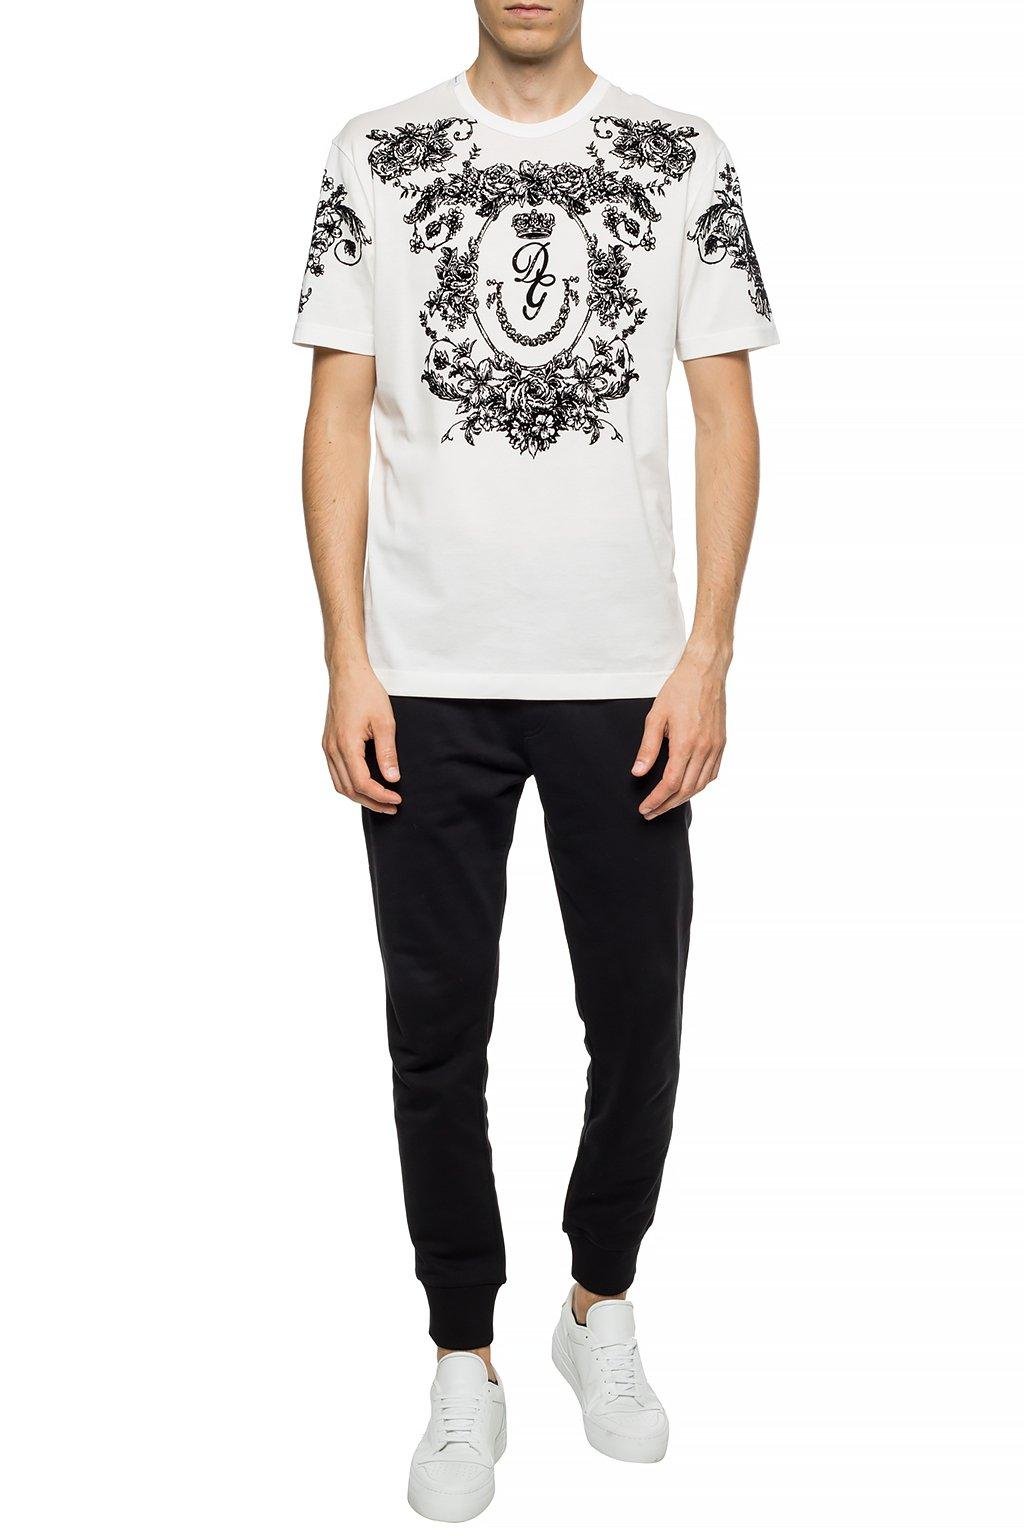 Dolce & Gabbana Cotton Flocked Dg Floral Print T-shirt in White for 